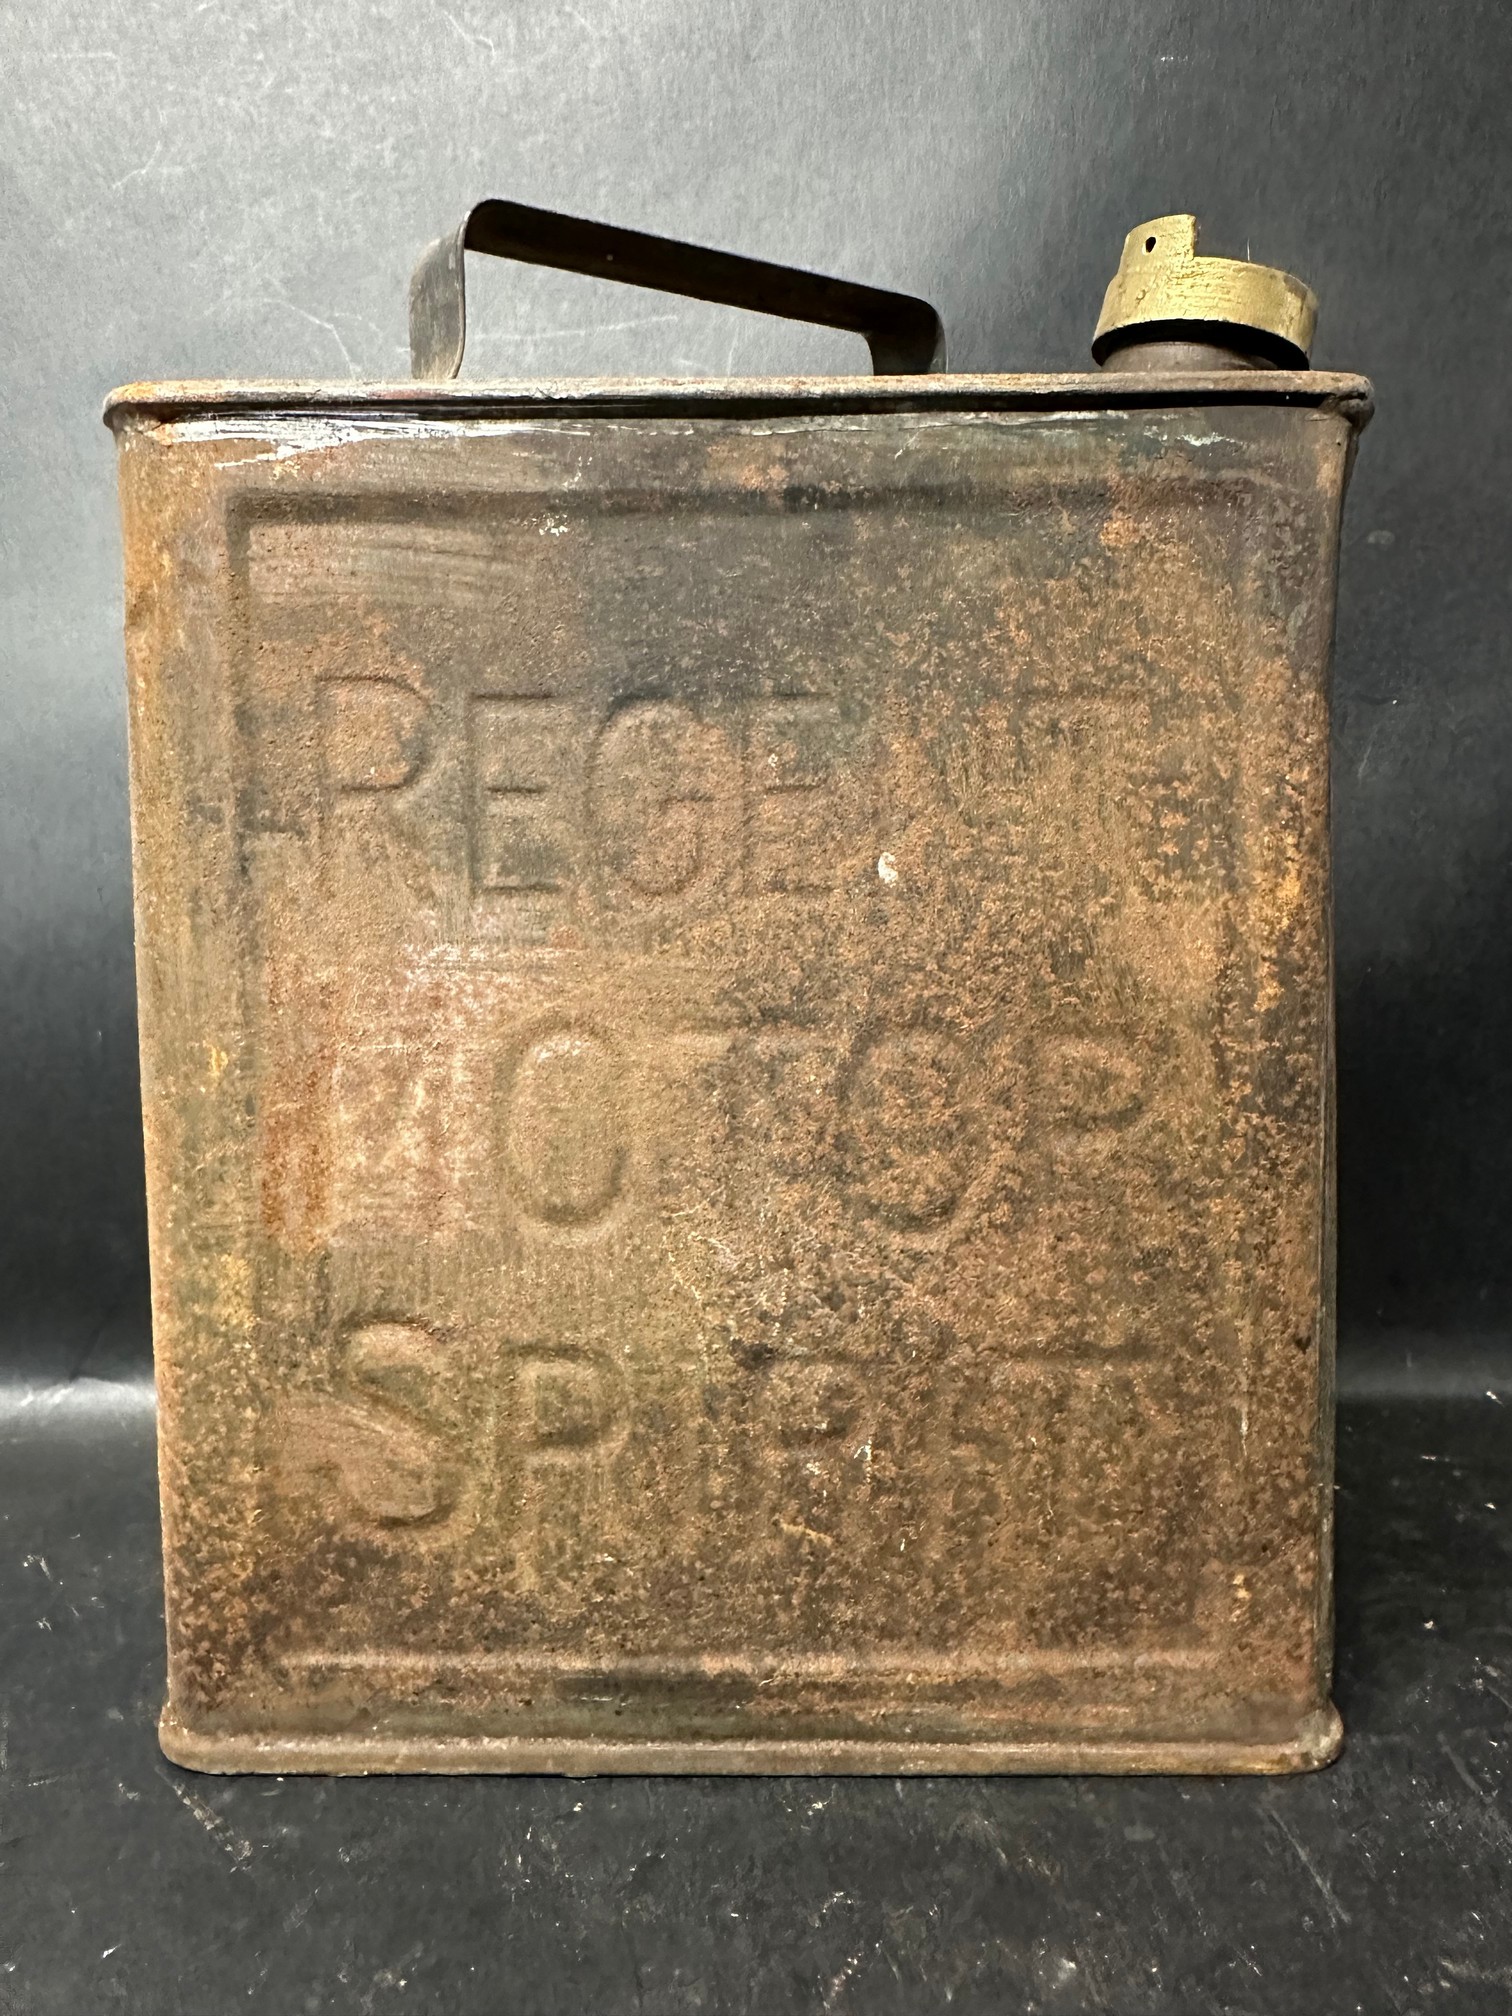 A Regent Motor Spirit two gallon petrol can with Shell cap.